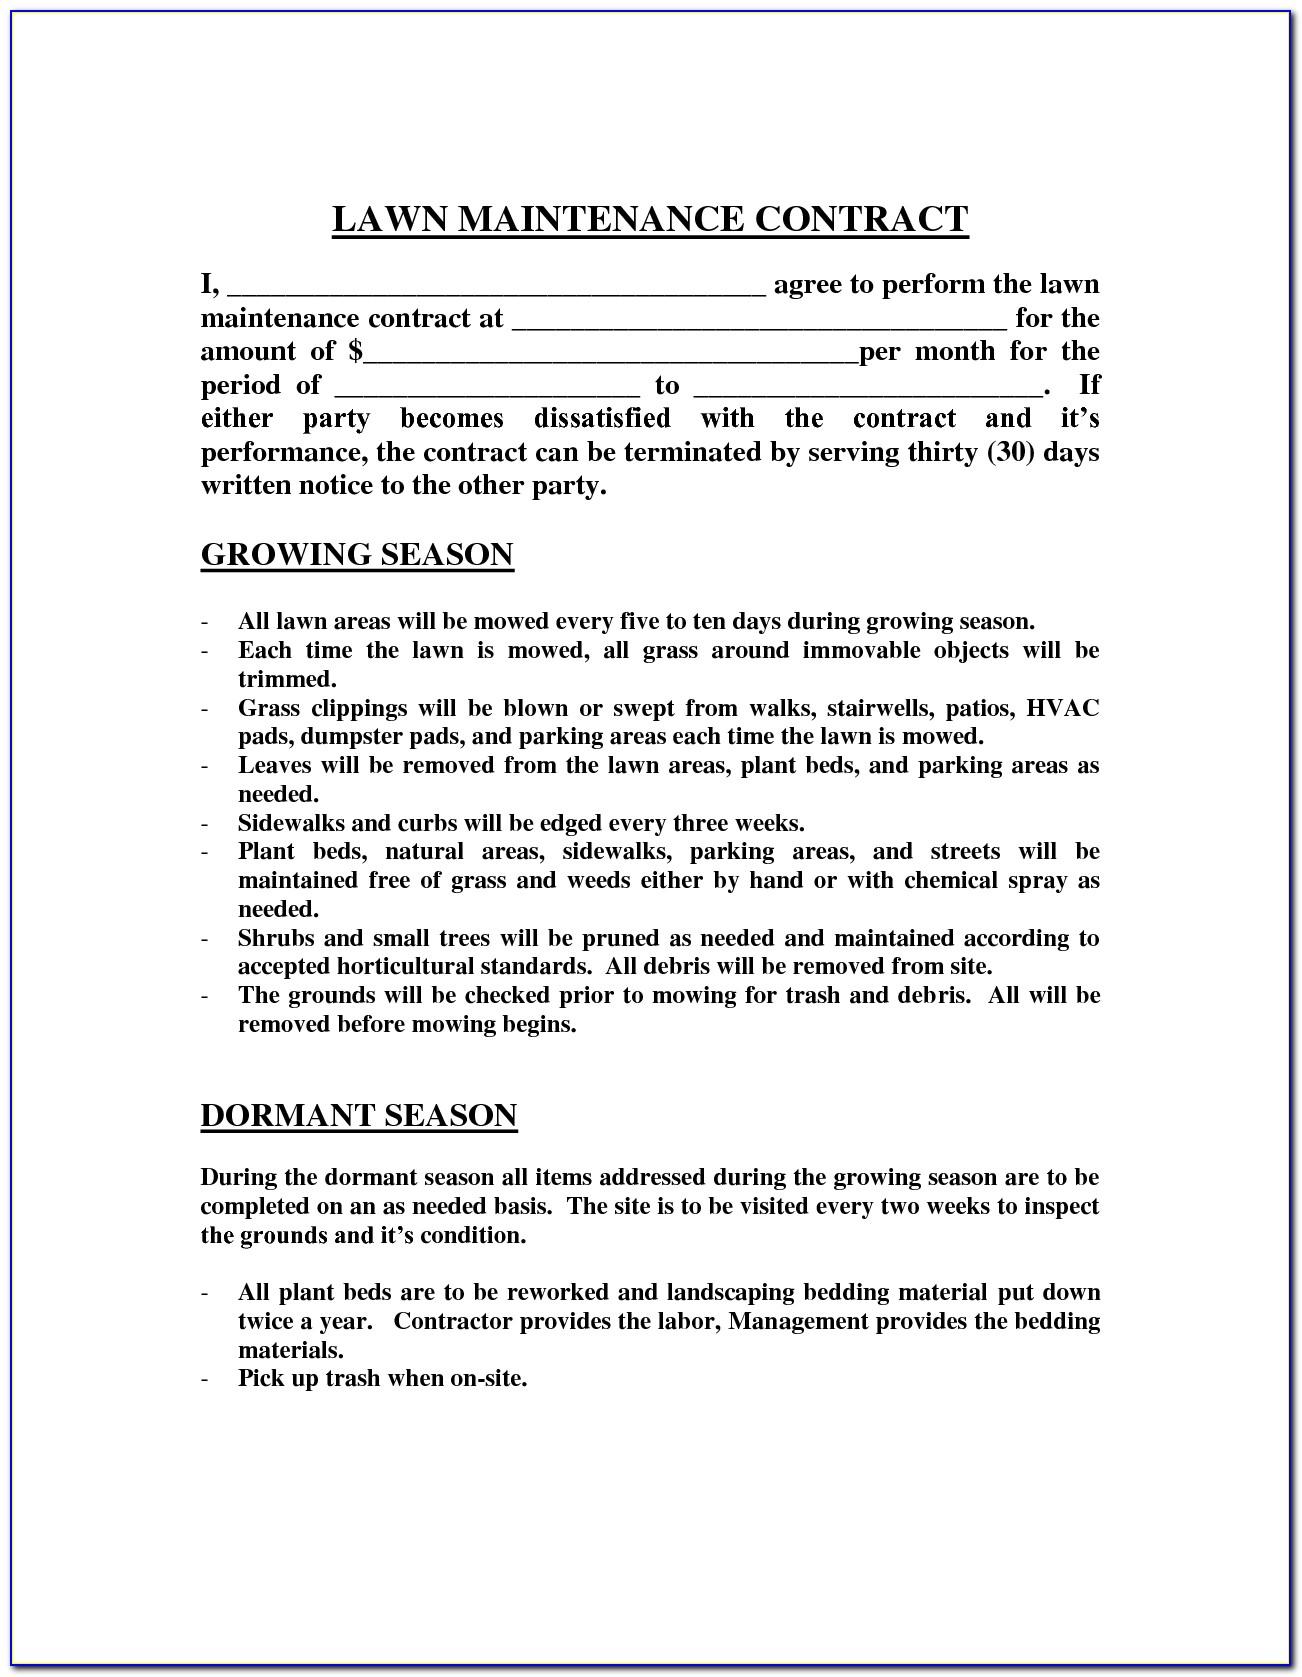 Lawn Maintenance Contract Agreement Sample